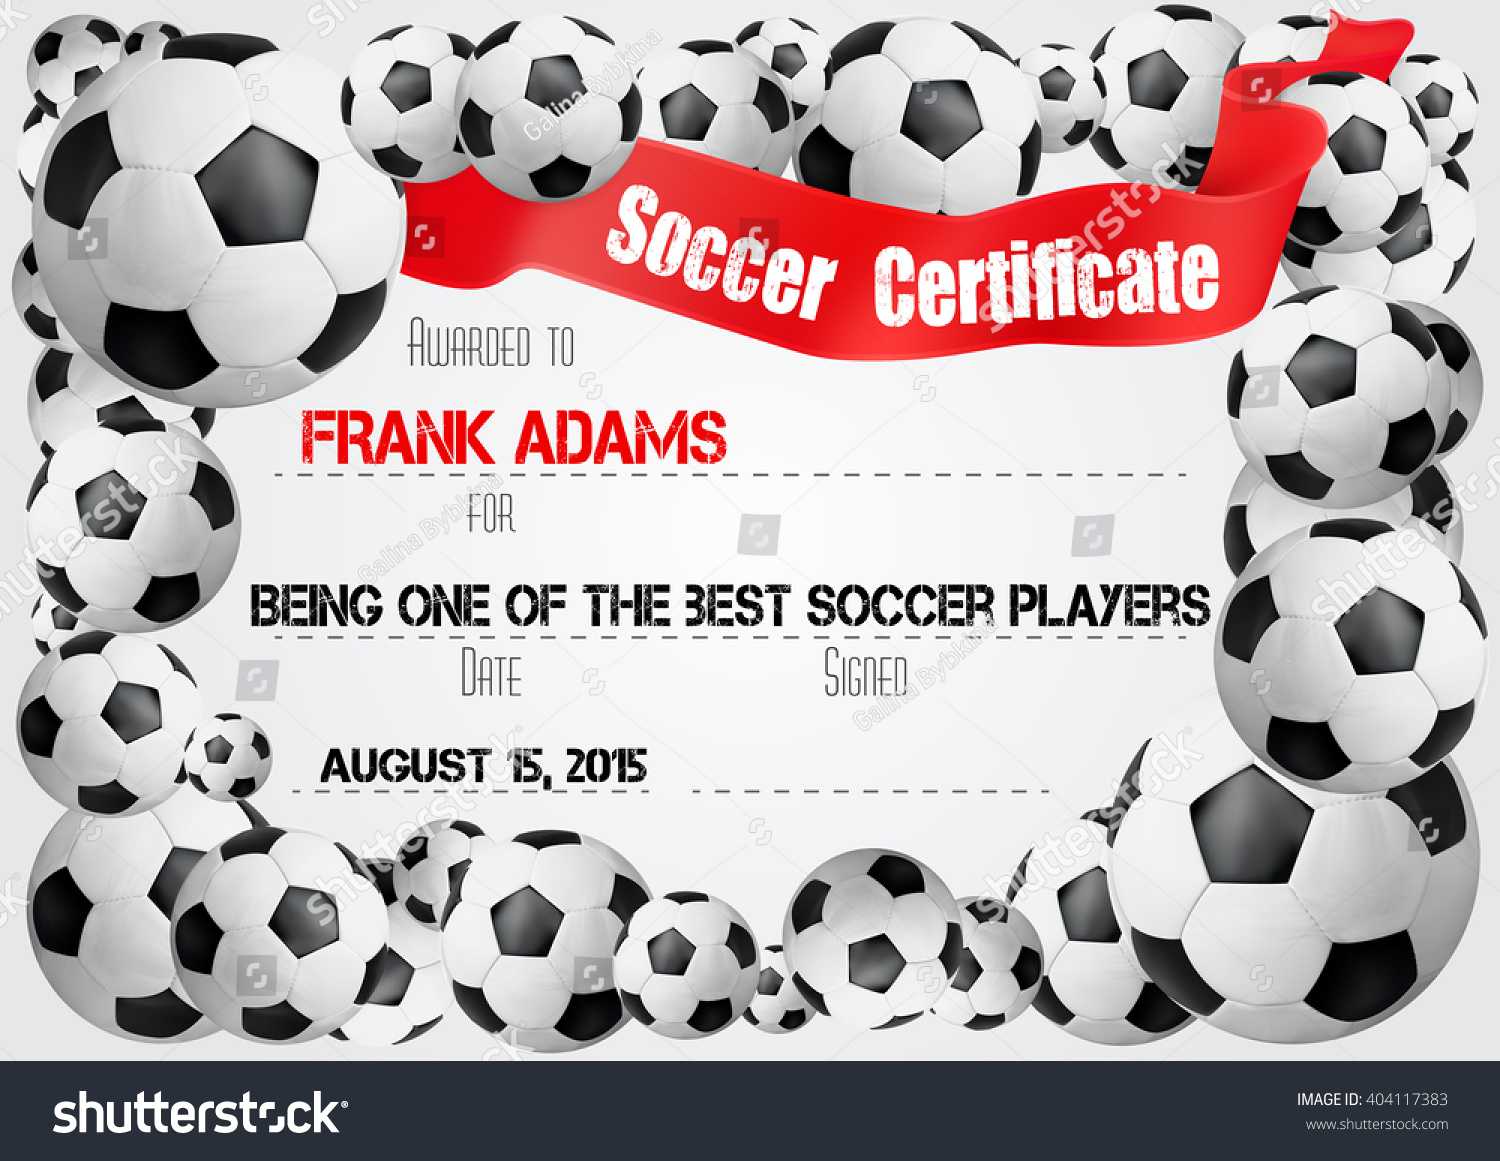 Soccer Certificate Template Football Ball Icons Stock Image With Regard To Soccer Certificate Template Free